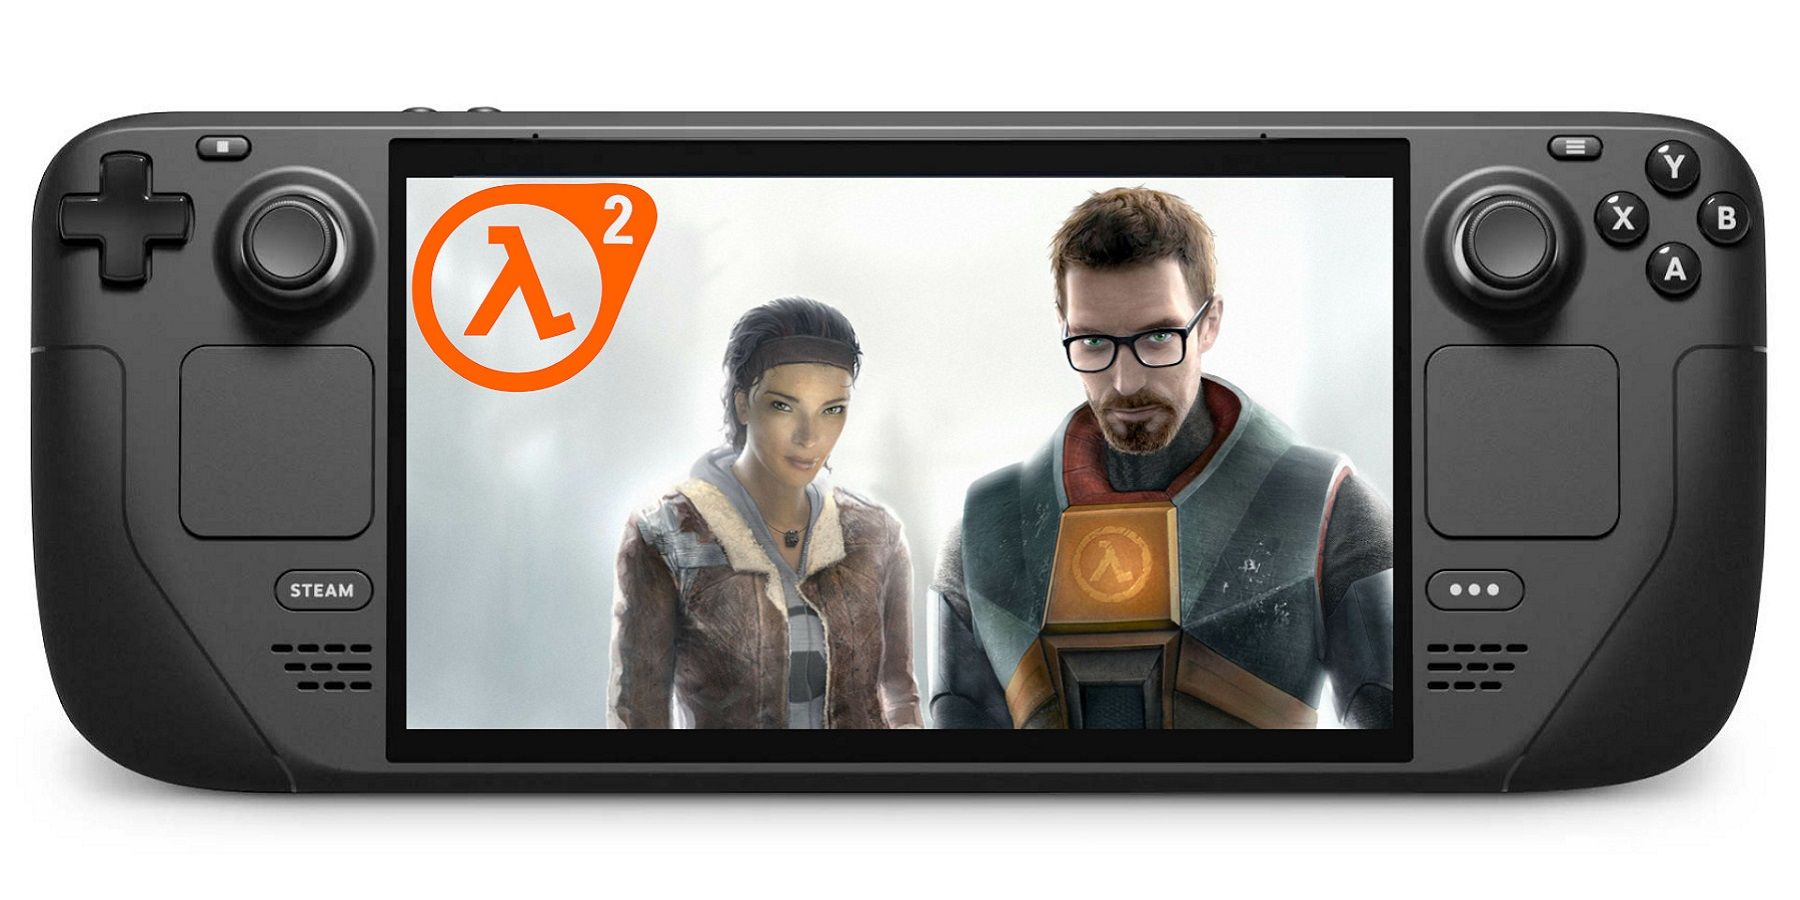 Image of a Valve Steam Deck with a Half-Life 2 picture on the screen showing Gordon Freeman and Alyx Vance.